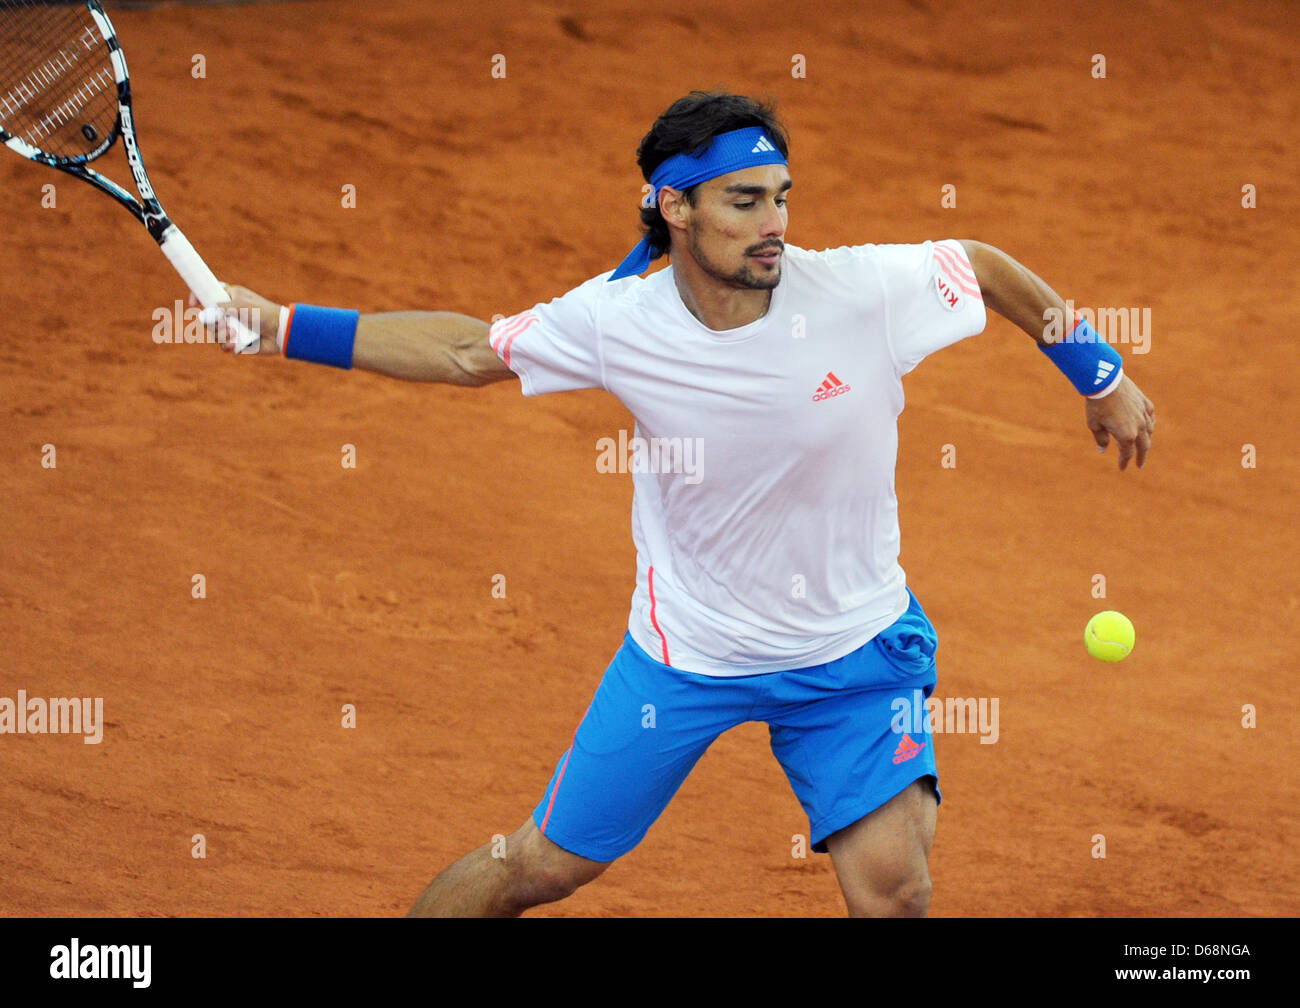 Italian tennis player Fabio Fognini hits the ball during the match against  German player Kohlschreiber at